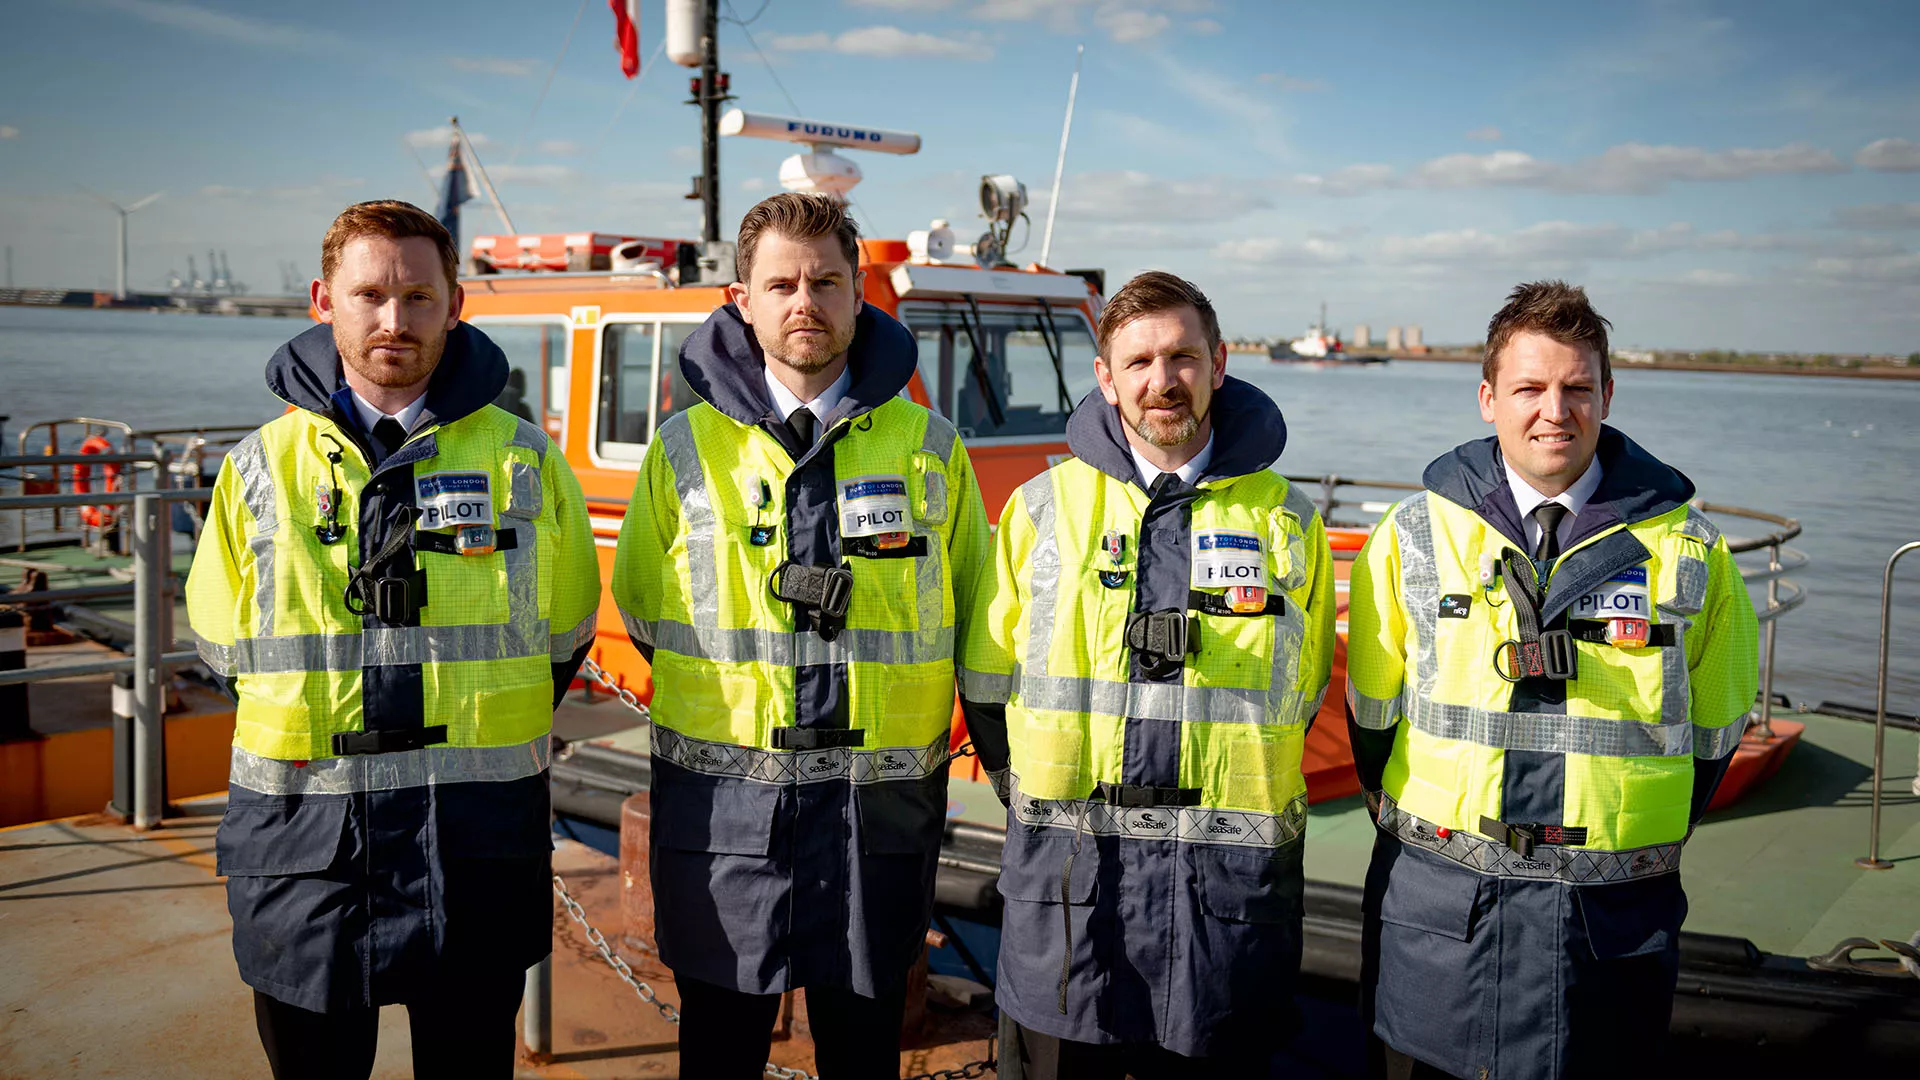 Four new Trainee PLA Pilots with a PLA Pilot cutter vessel in the background